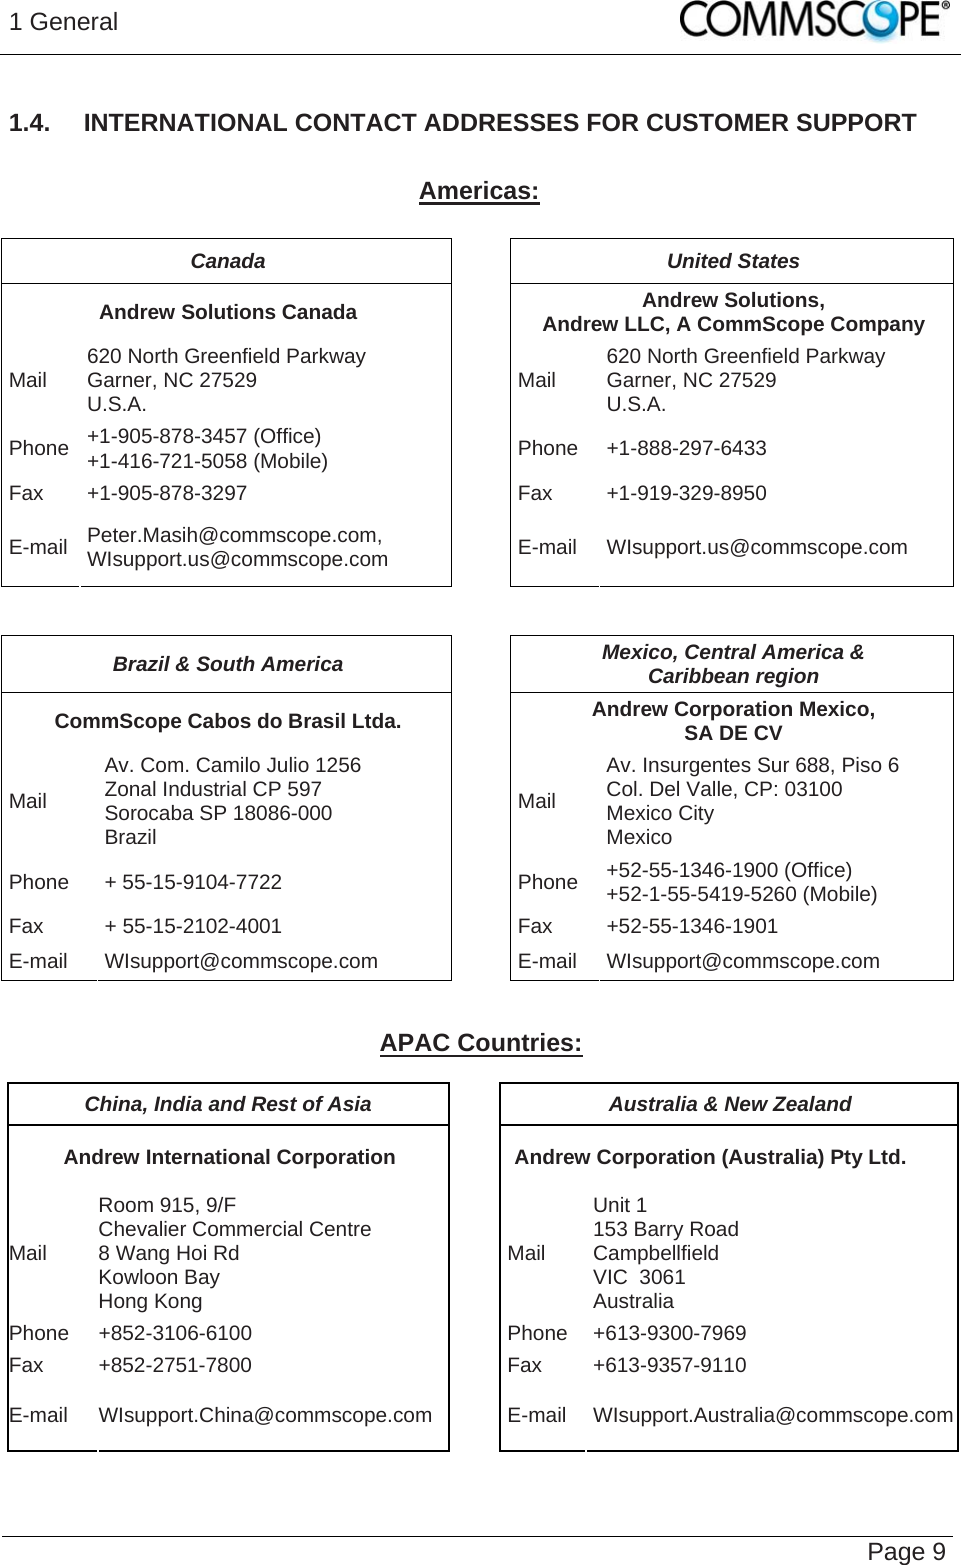 1 General   Page 9 1.4.  INTERNATIONAL CONTACT ADDRESSES FOR CUSTOMER SUPPORT  Americas:  Canada United States Andrew Solutions Canada  Andrew Solutions,  Andrew LLC, A CommScope Company Mail  620 North Greenfield Parkway Garner, NC 27529 U.S.A.  Mail  620 North Greenfield Parkway Garner, NC 27529 U.S.A. Phone  +1-905-878-3457 (Office) +1-416-721-5058 (Mobile) Phone +1-888-297-6433 Fax +1-905-878-3297  Fax  +1-919-329-8950 E-mail  Peter.Masih@commscope.com, WIsupport.us@commscope.com  E-mail WIsupport.us@commscope.com   Brazil &amp; South America  Mexico, Central America &amp;  Caribbean region CommScope Cabos do Brasil Ltda.  Andrew Corporation Mexico,  SA DE CV Mail Av. Com. Camilo Julio 1256 Zonal Industrial CP 597 Sorocaba SP 18086-000 Brazil Mail Av. Insurgentes Sur 688, Piso 6 Col. Del Valle, CP: 03100 Mexico City Mexico Phone + 55-15-9104-7722  Phone +52-55-1346-1900 (Office) +52-1-55-5419-5260 (Mobile) Fax + 55-15-2102-4001  Fax +52-55-1346-1901 E-mail WIsupport@commscope.com  E-mail WIsupport@commscope.com   APAC Countries:  China, India and Rest of Asia  Australia &amp; New Zealand Andrew International Corporation  Andrew Corporation (Australia) Pty Ltd. Mail Room 915, 9/F  Chevalier Commercial Centre 8 Wang Hoi Rd Kowloon Bay  Hong Kong Mail Unit 1 153 Barry Road Campbellfield  VIC  3061 Australia Phone +852-3106-6100  Phone +613-9300-7969 Fax +852-2751-7800  Fax +613-9357-9110 E-mail WIsupport.China@commscope.com  E-mail WIsupport.Australia@commscope.com 